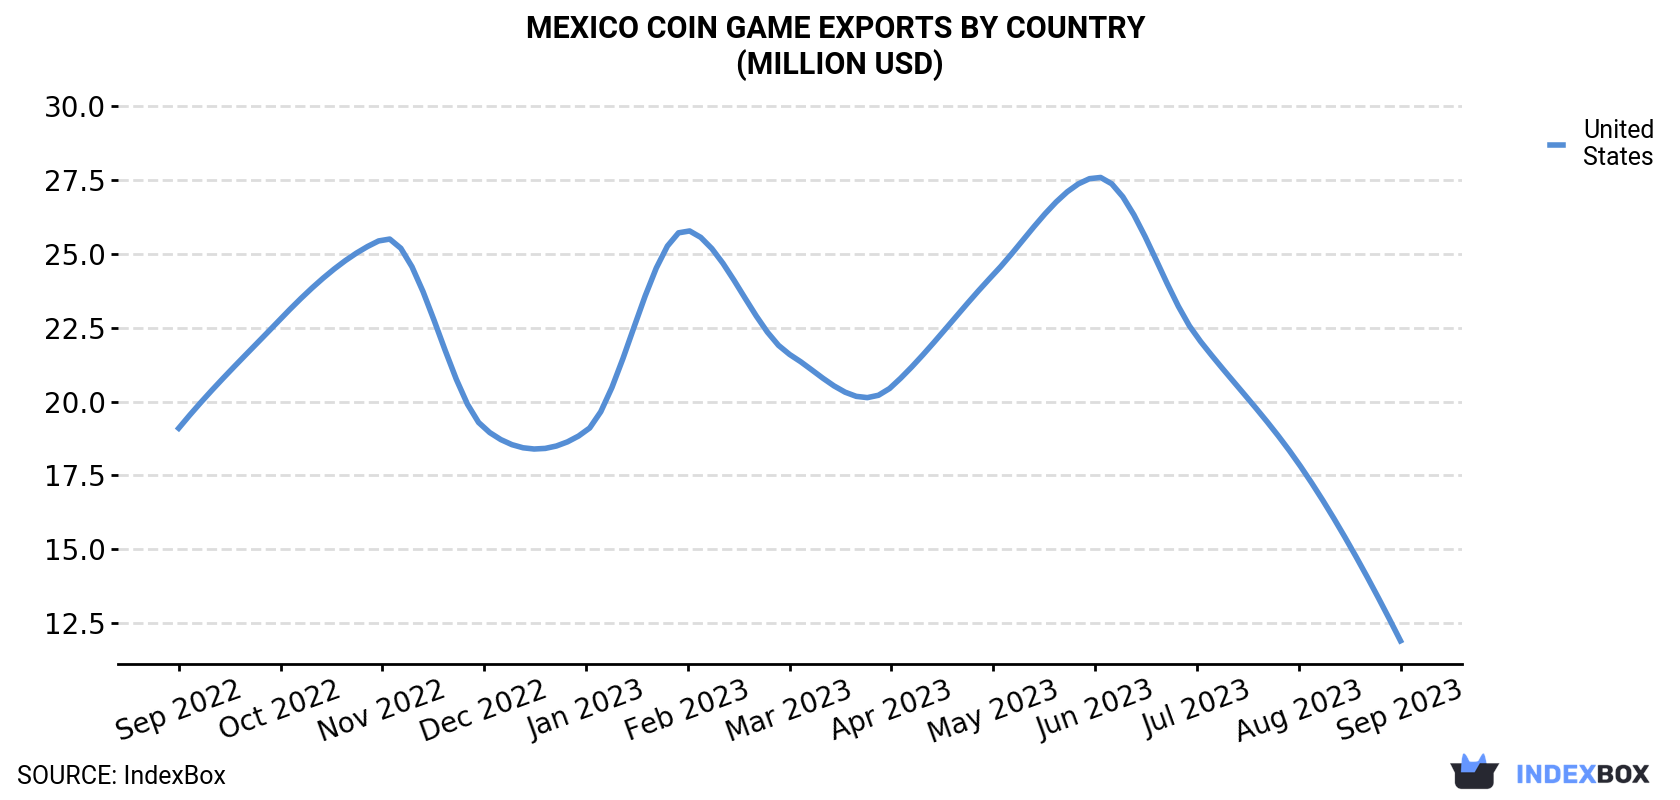 Mexico Coin Game Exports By Country (Million USD)